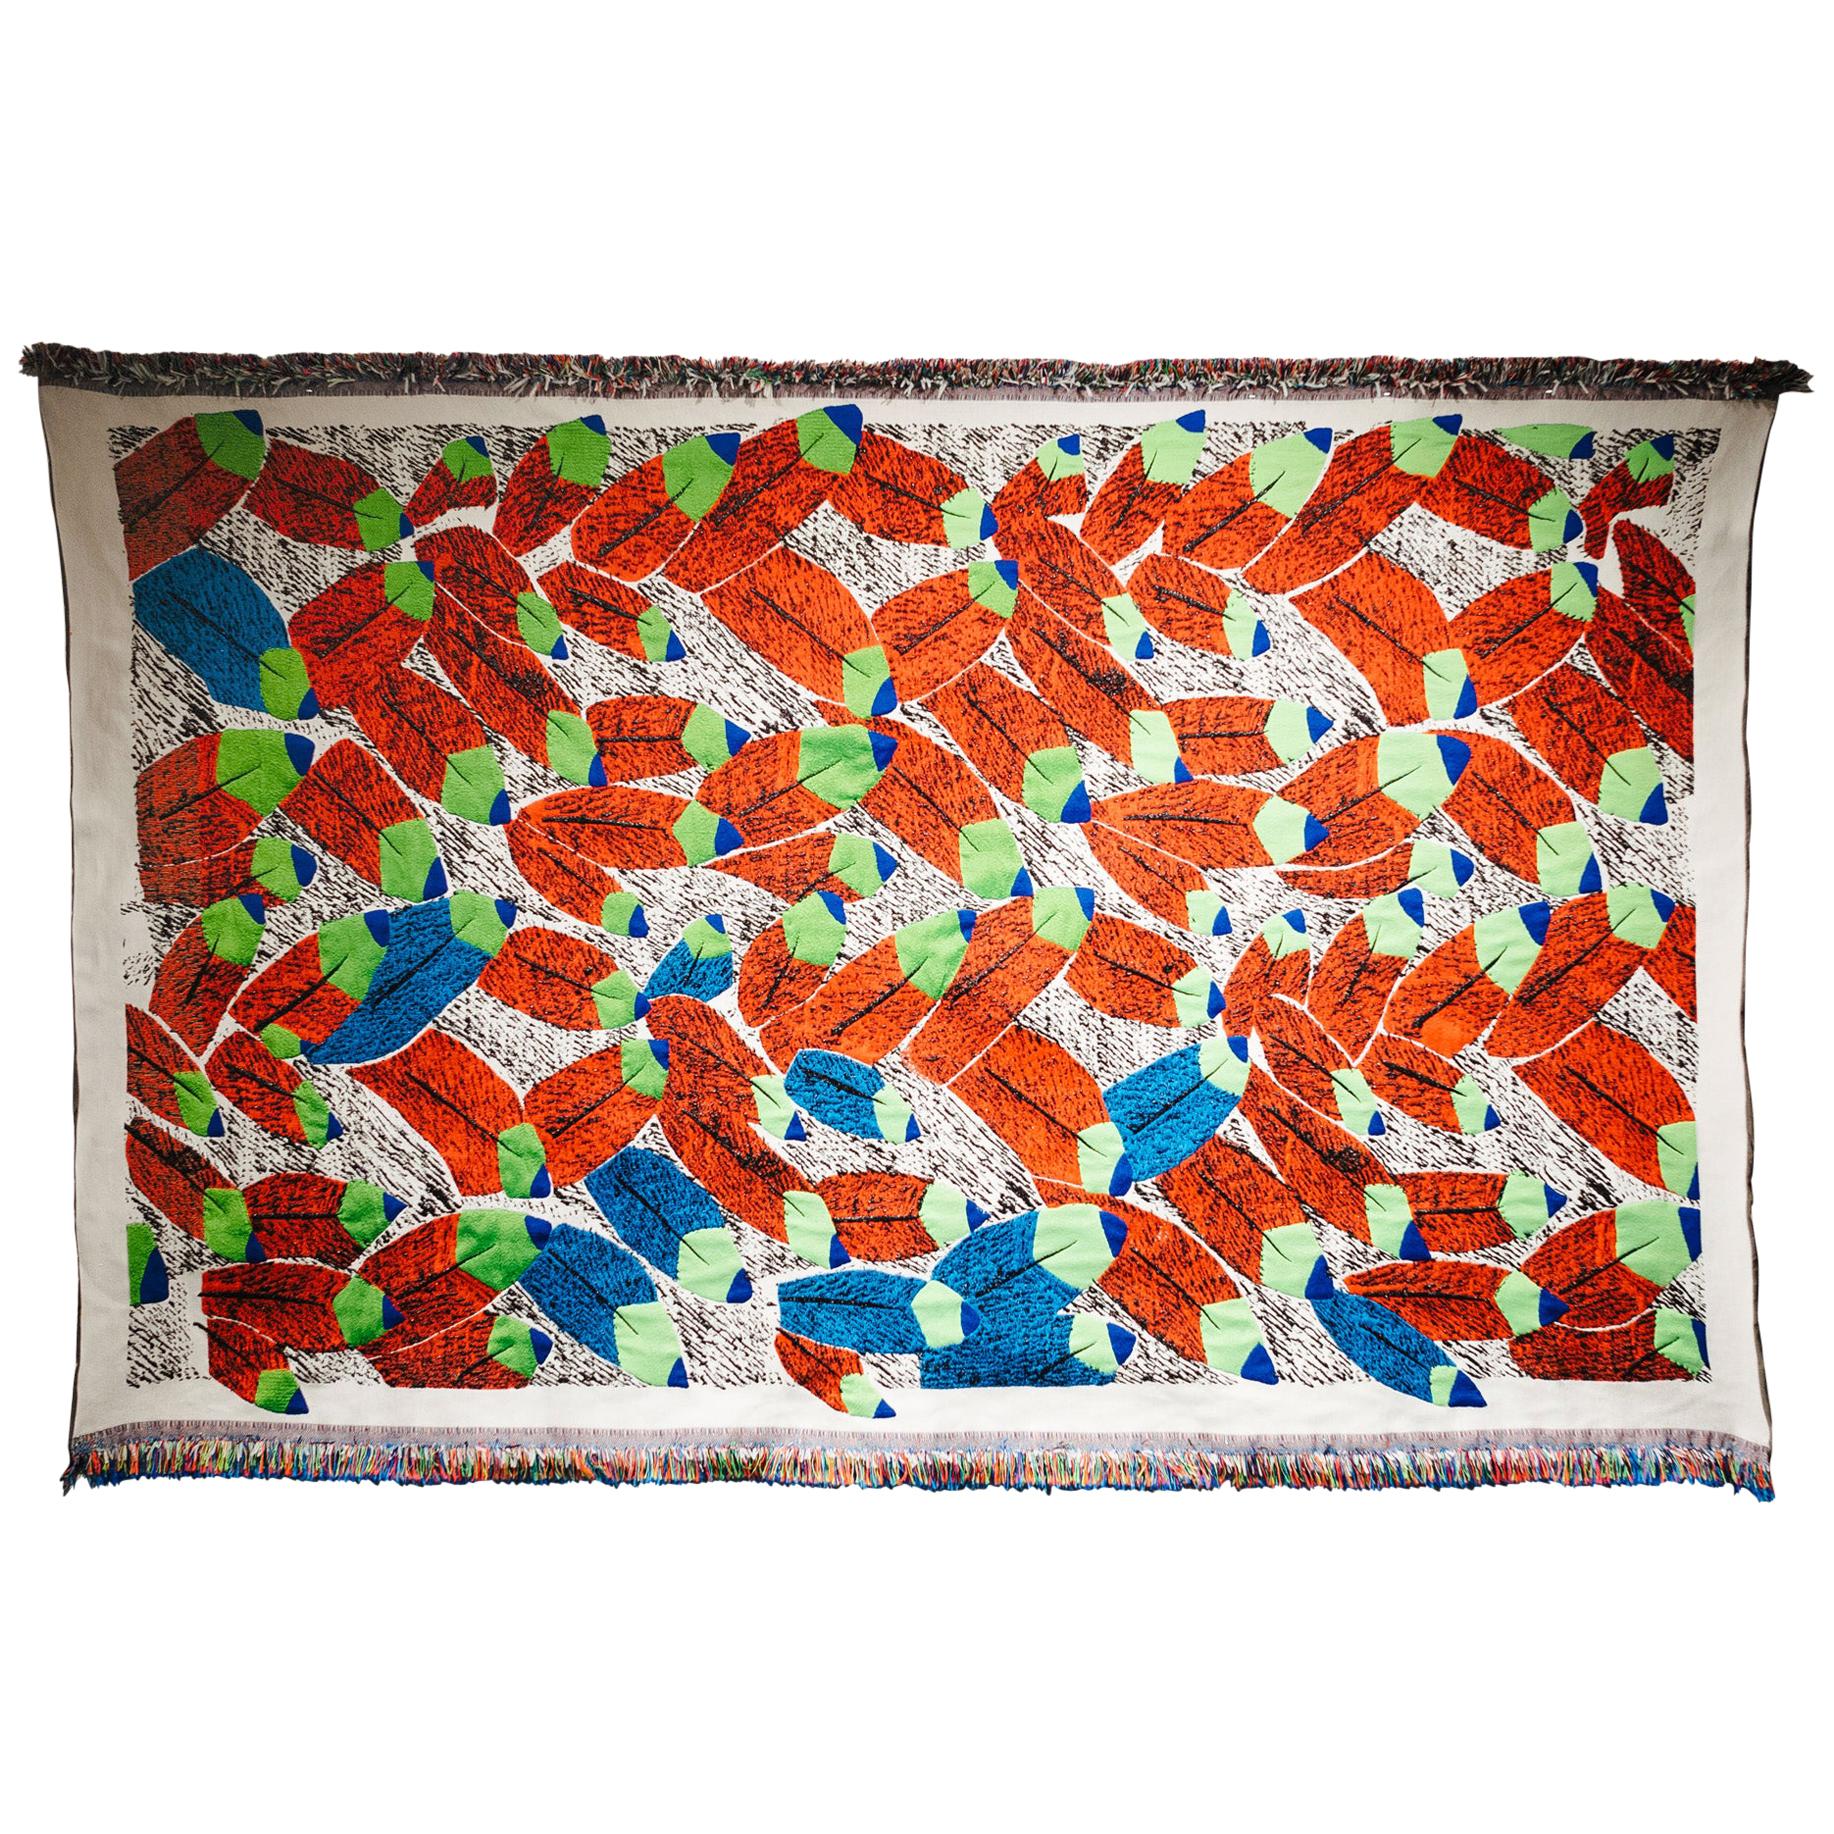 Ugo La Pietra Artificial Nature #6 Recycled Fibers Tapestry For Sale